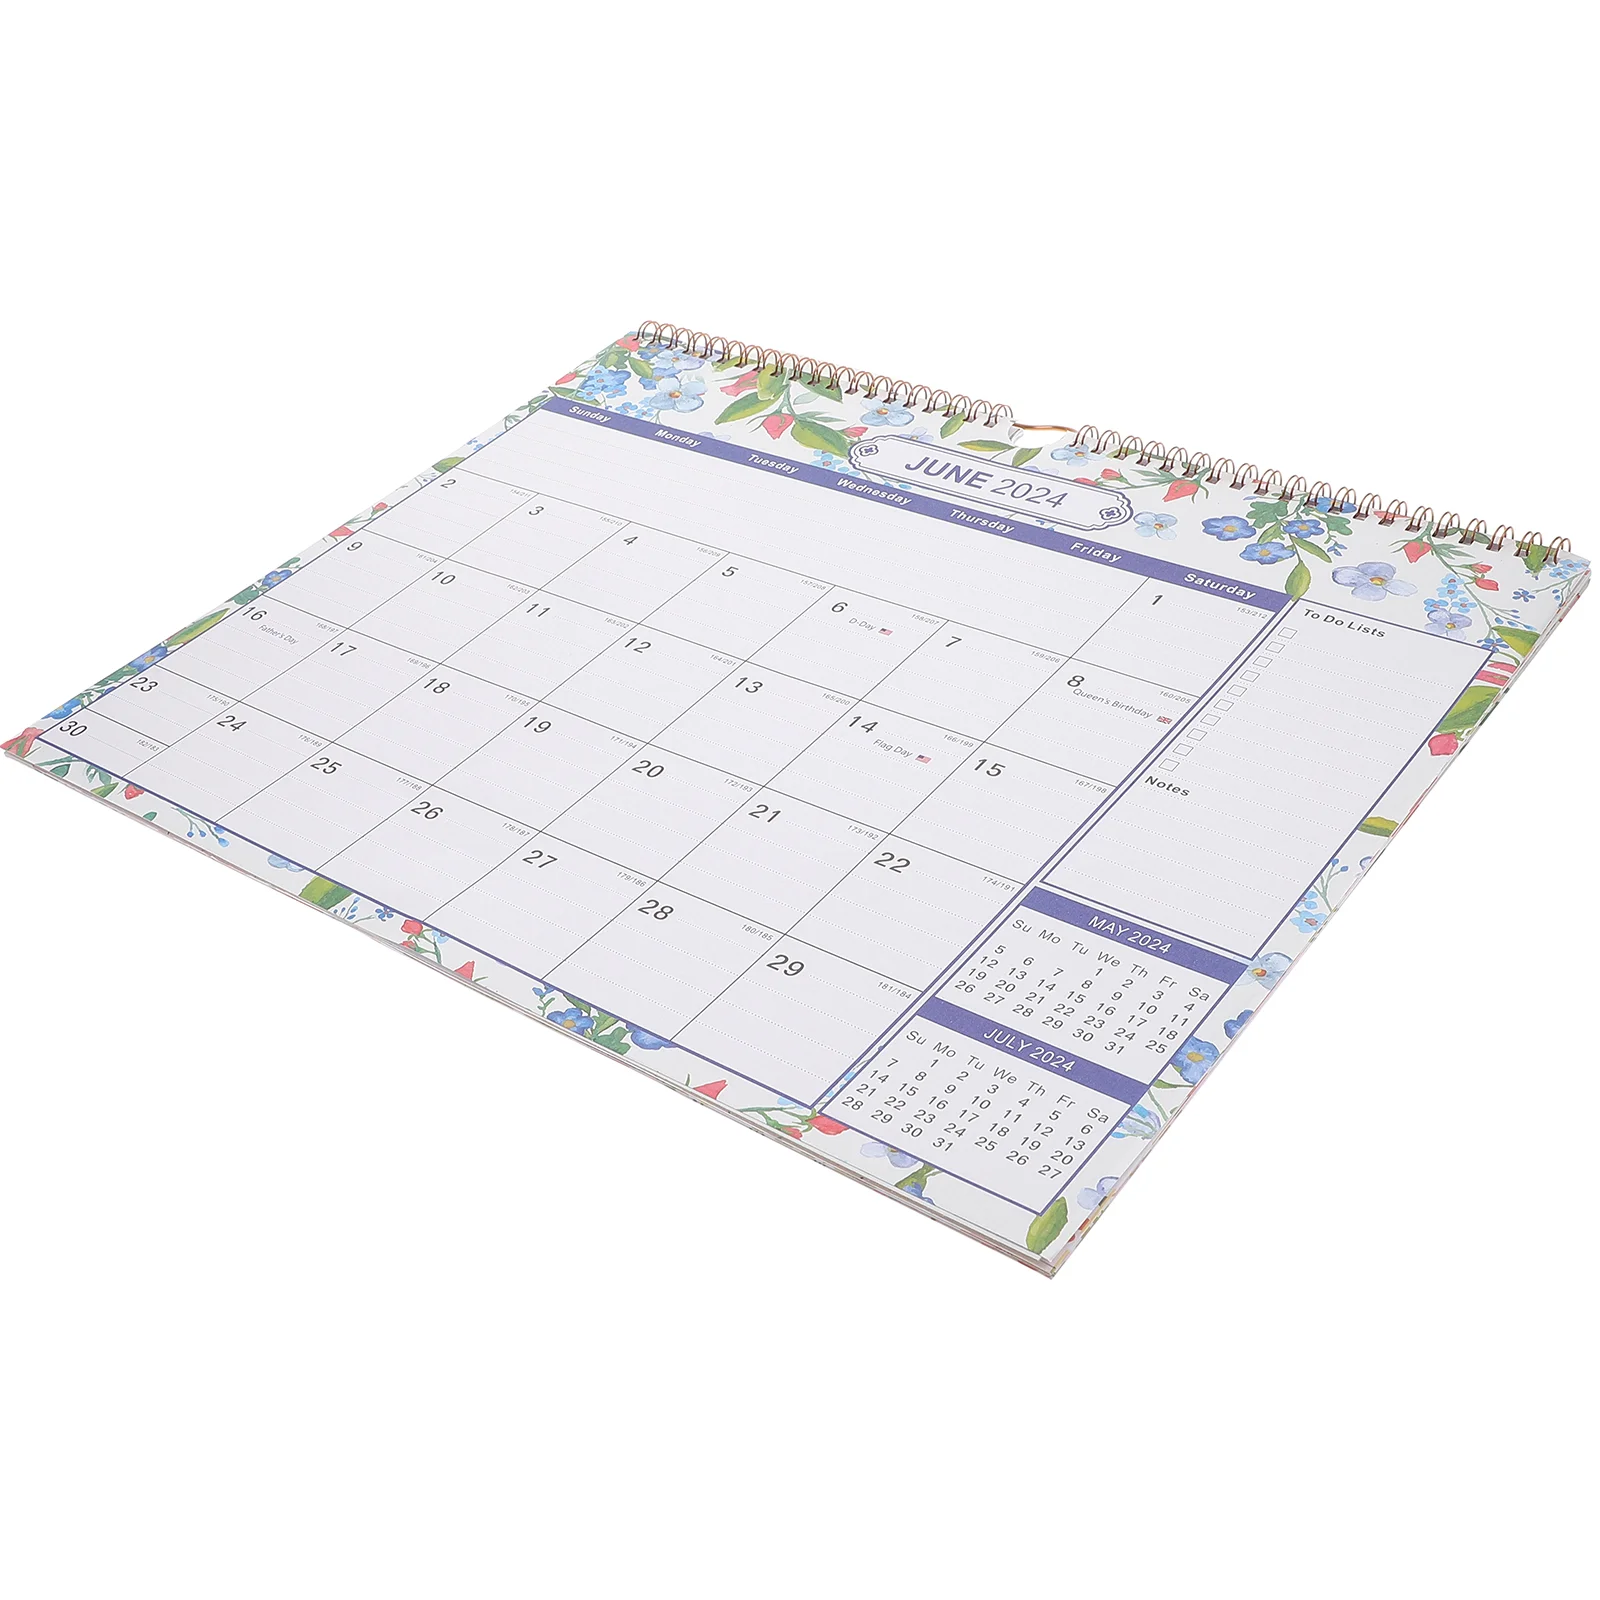 

Calendar Wall Monthly 2023 Planner Hanging Schedule Office Desk Academic Paper Year Calendars Agenda Month Note Weekly Home